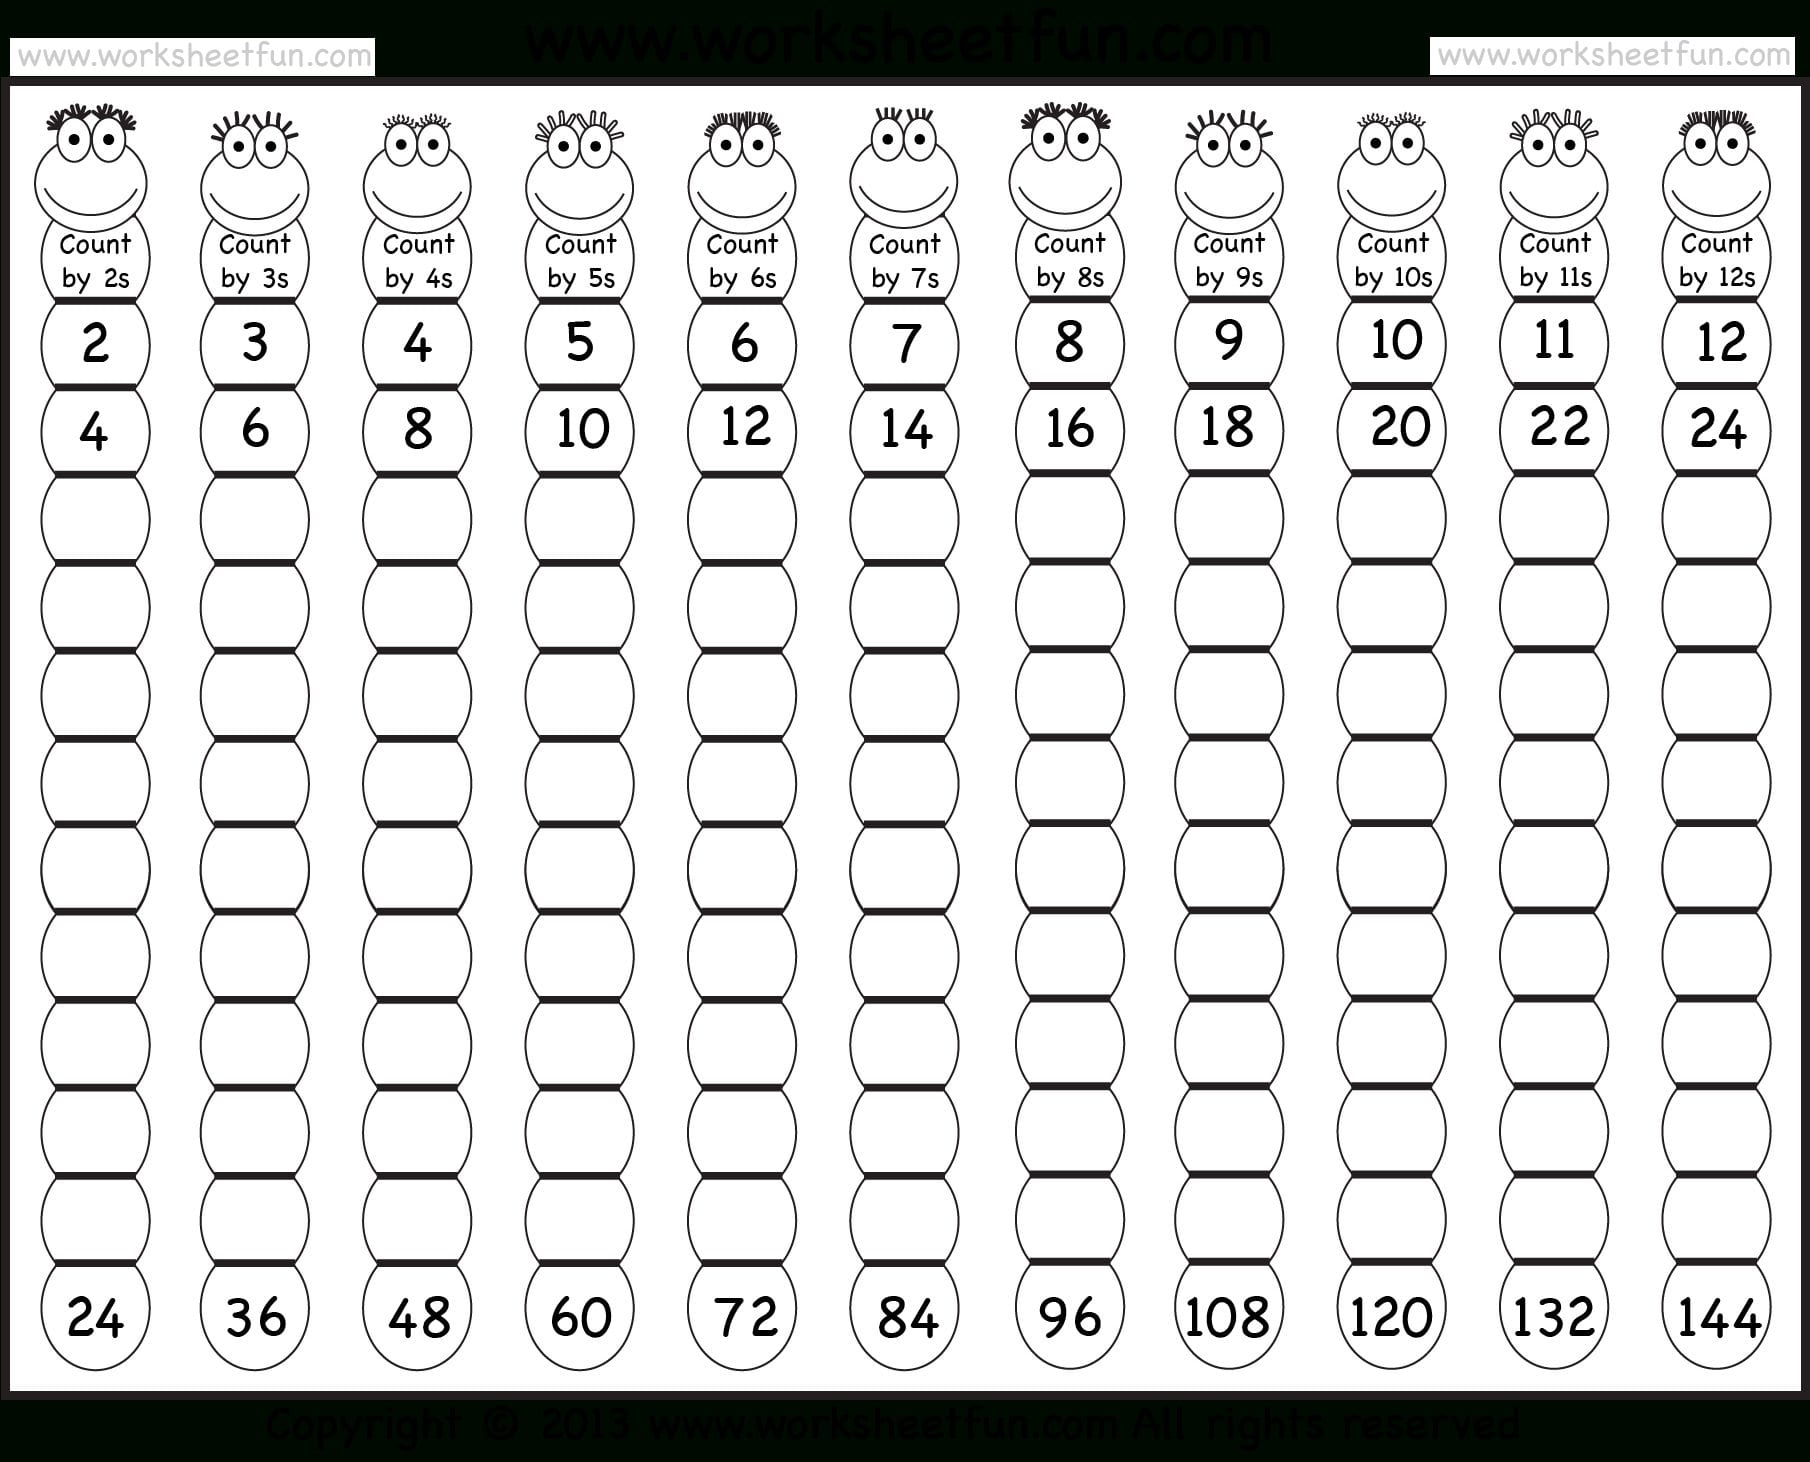 Times Table – 212 Worksheets – 1 2 3 4 5 6 7 8 9